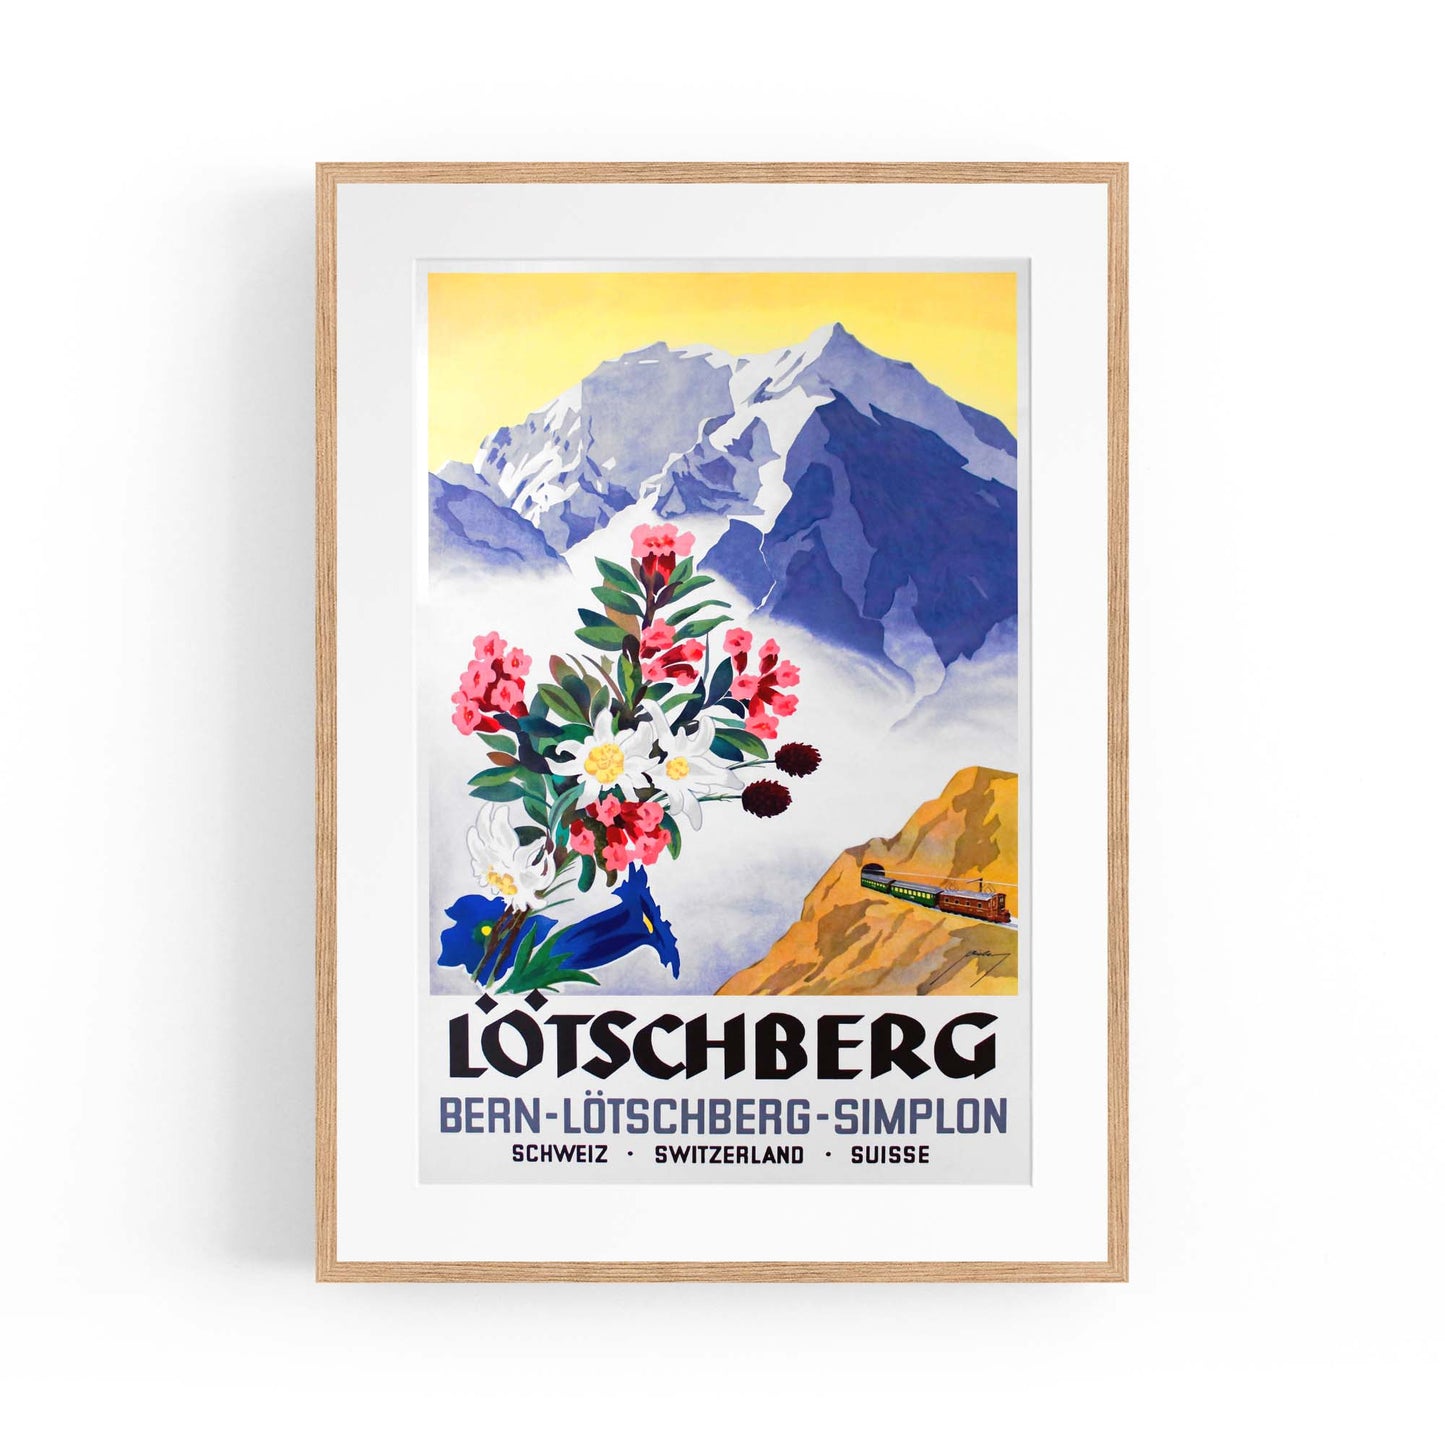 Lotschberg Switzerland Vintage Travel Advert Wall Art - The Affordable Art Company